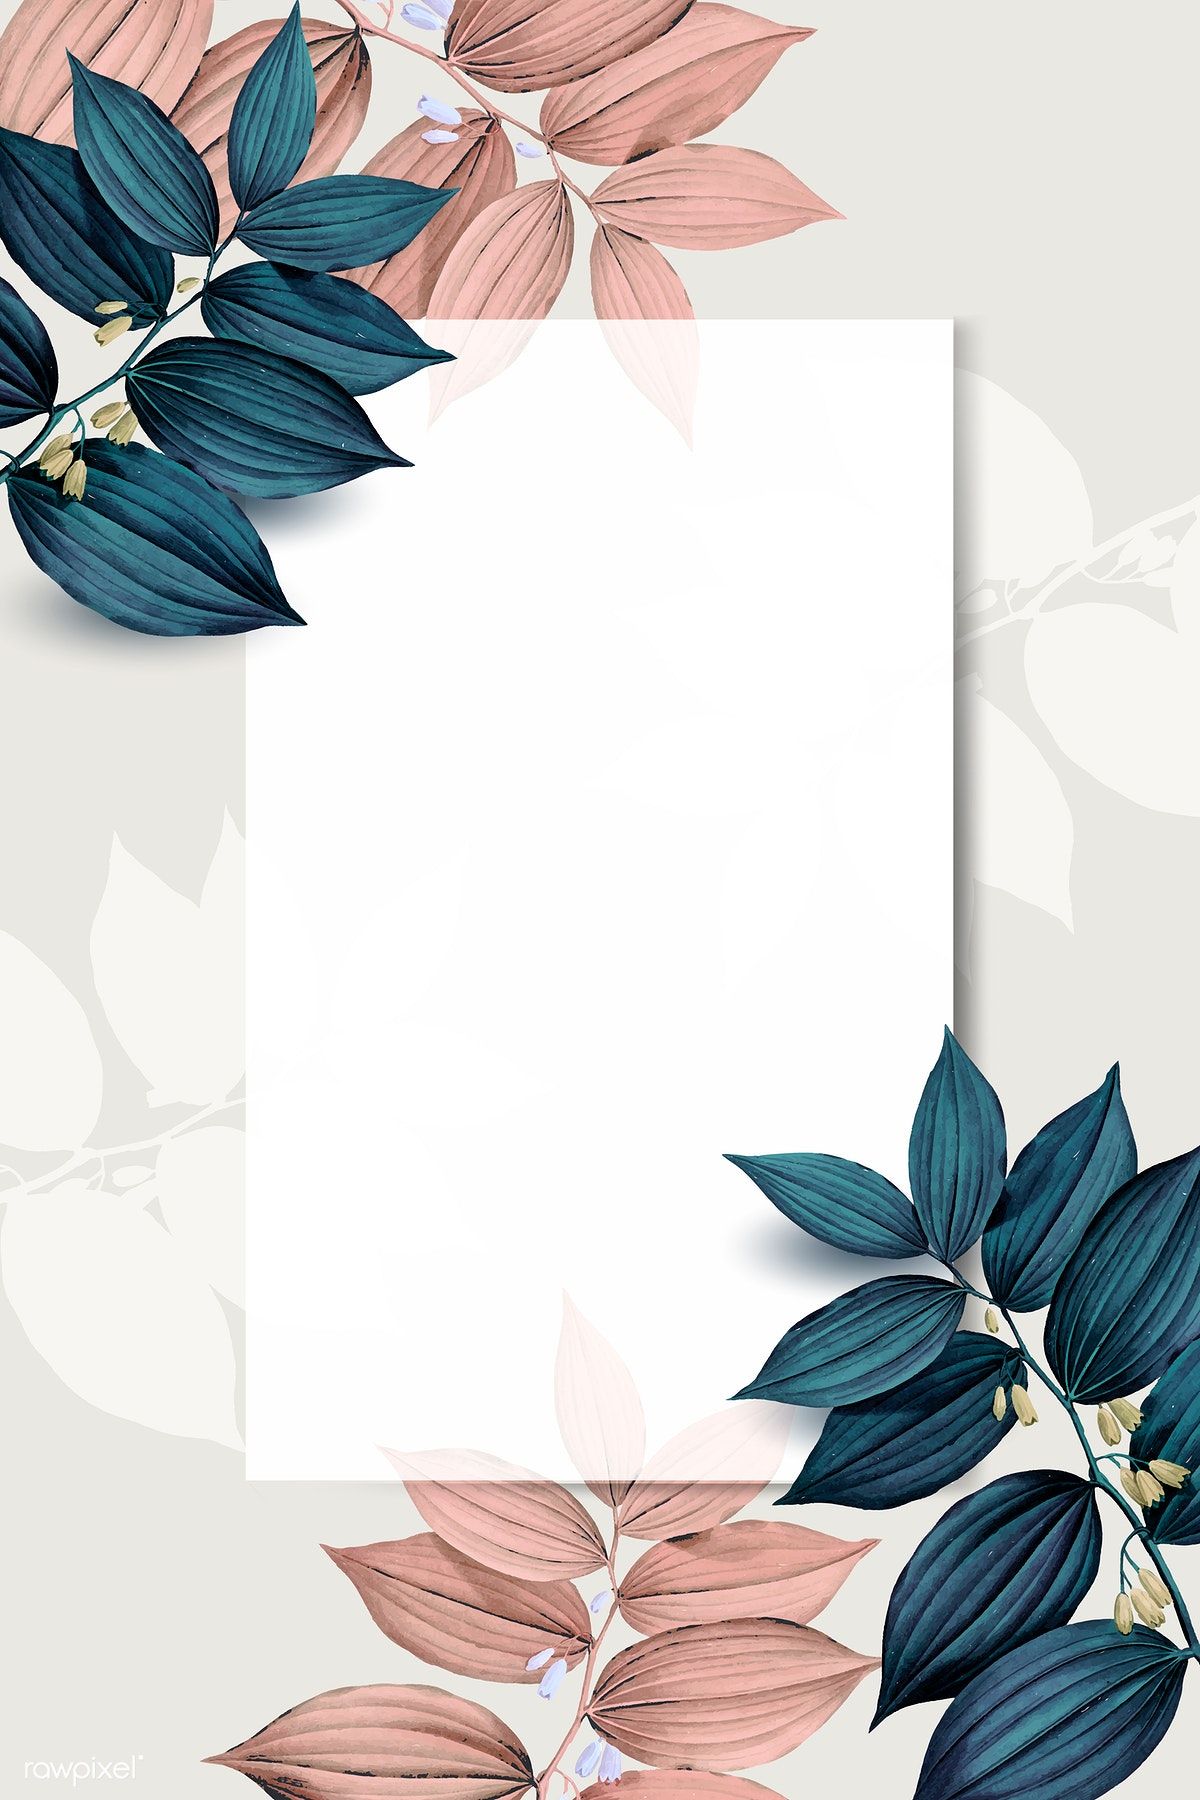 Rectangle white frame on pink and blue leaf pattern background vector | premium image by rawpixel.com / wan